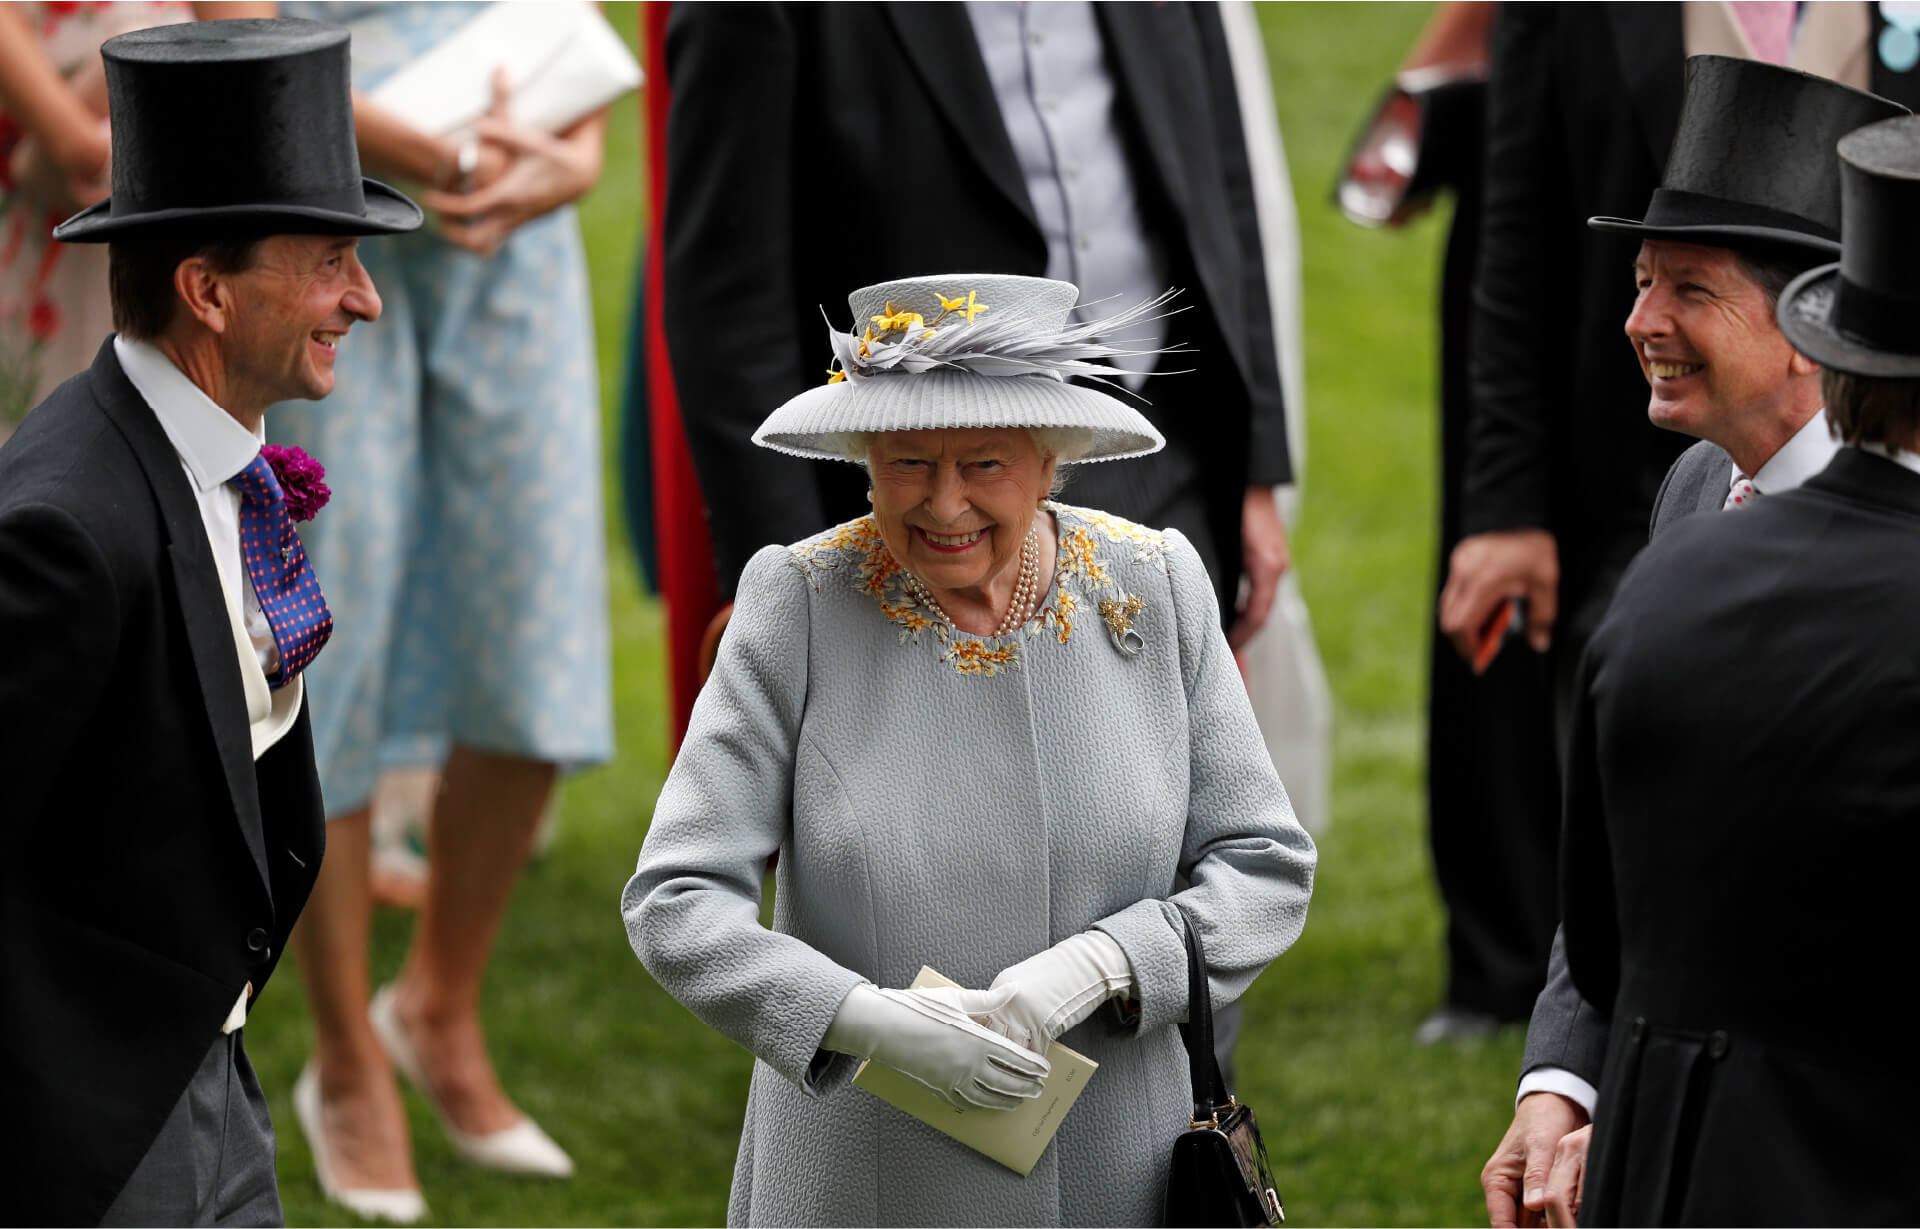 Queen Elizabeth wears a gray coat embroidered with yellow flowers around the collar, with a matching medium-brimmed gray hat decorated with feathers and yellow flowers.  She is surrounded by men in black top hats and tailcoats.